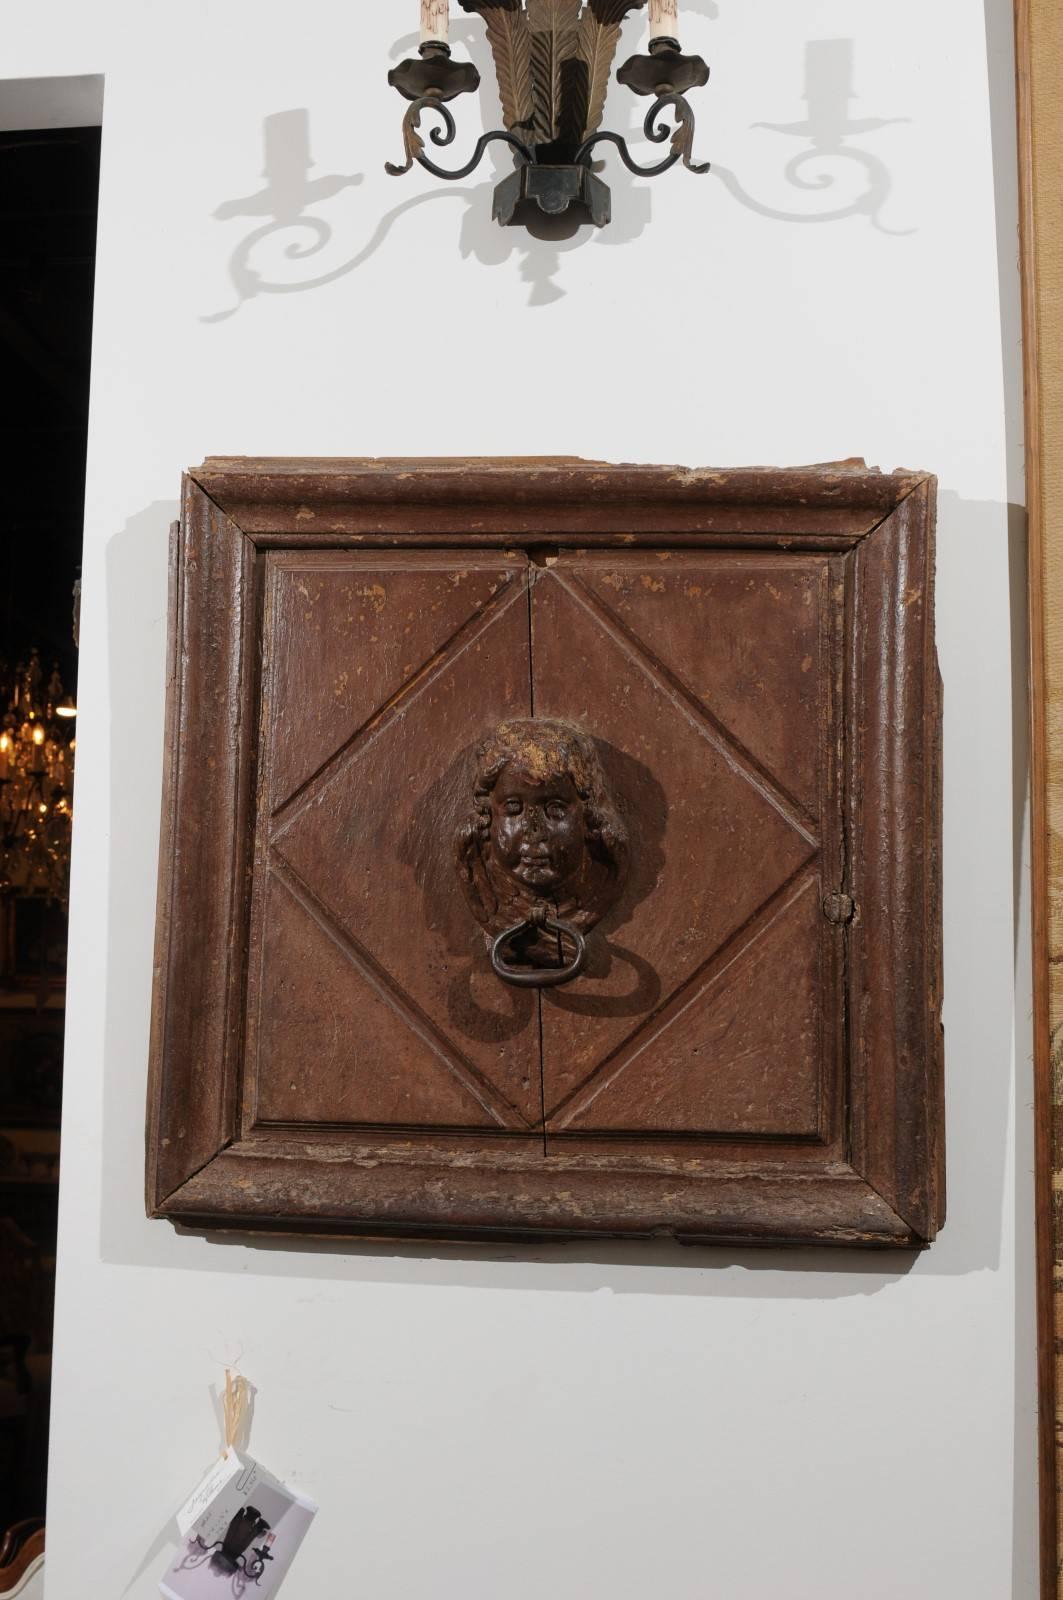 A pair of French 17th century square wooden wall fragments with high relief cherub carvings. Each of this pair of architectural pieces features a cherub face carved in high relief, surrounded by a diamond motif. The grand simplicity of the lines is